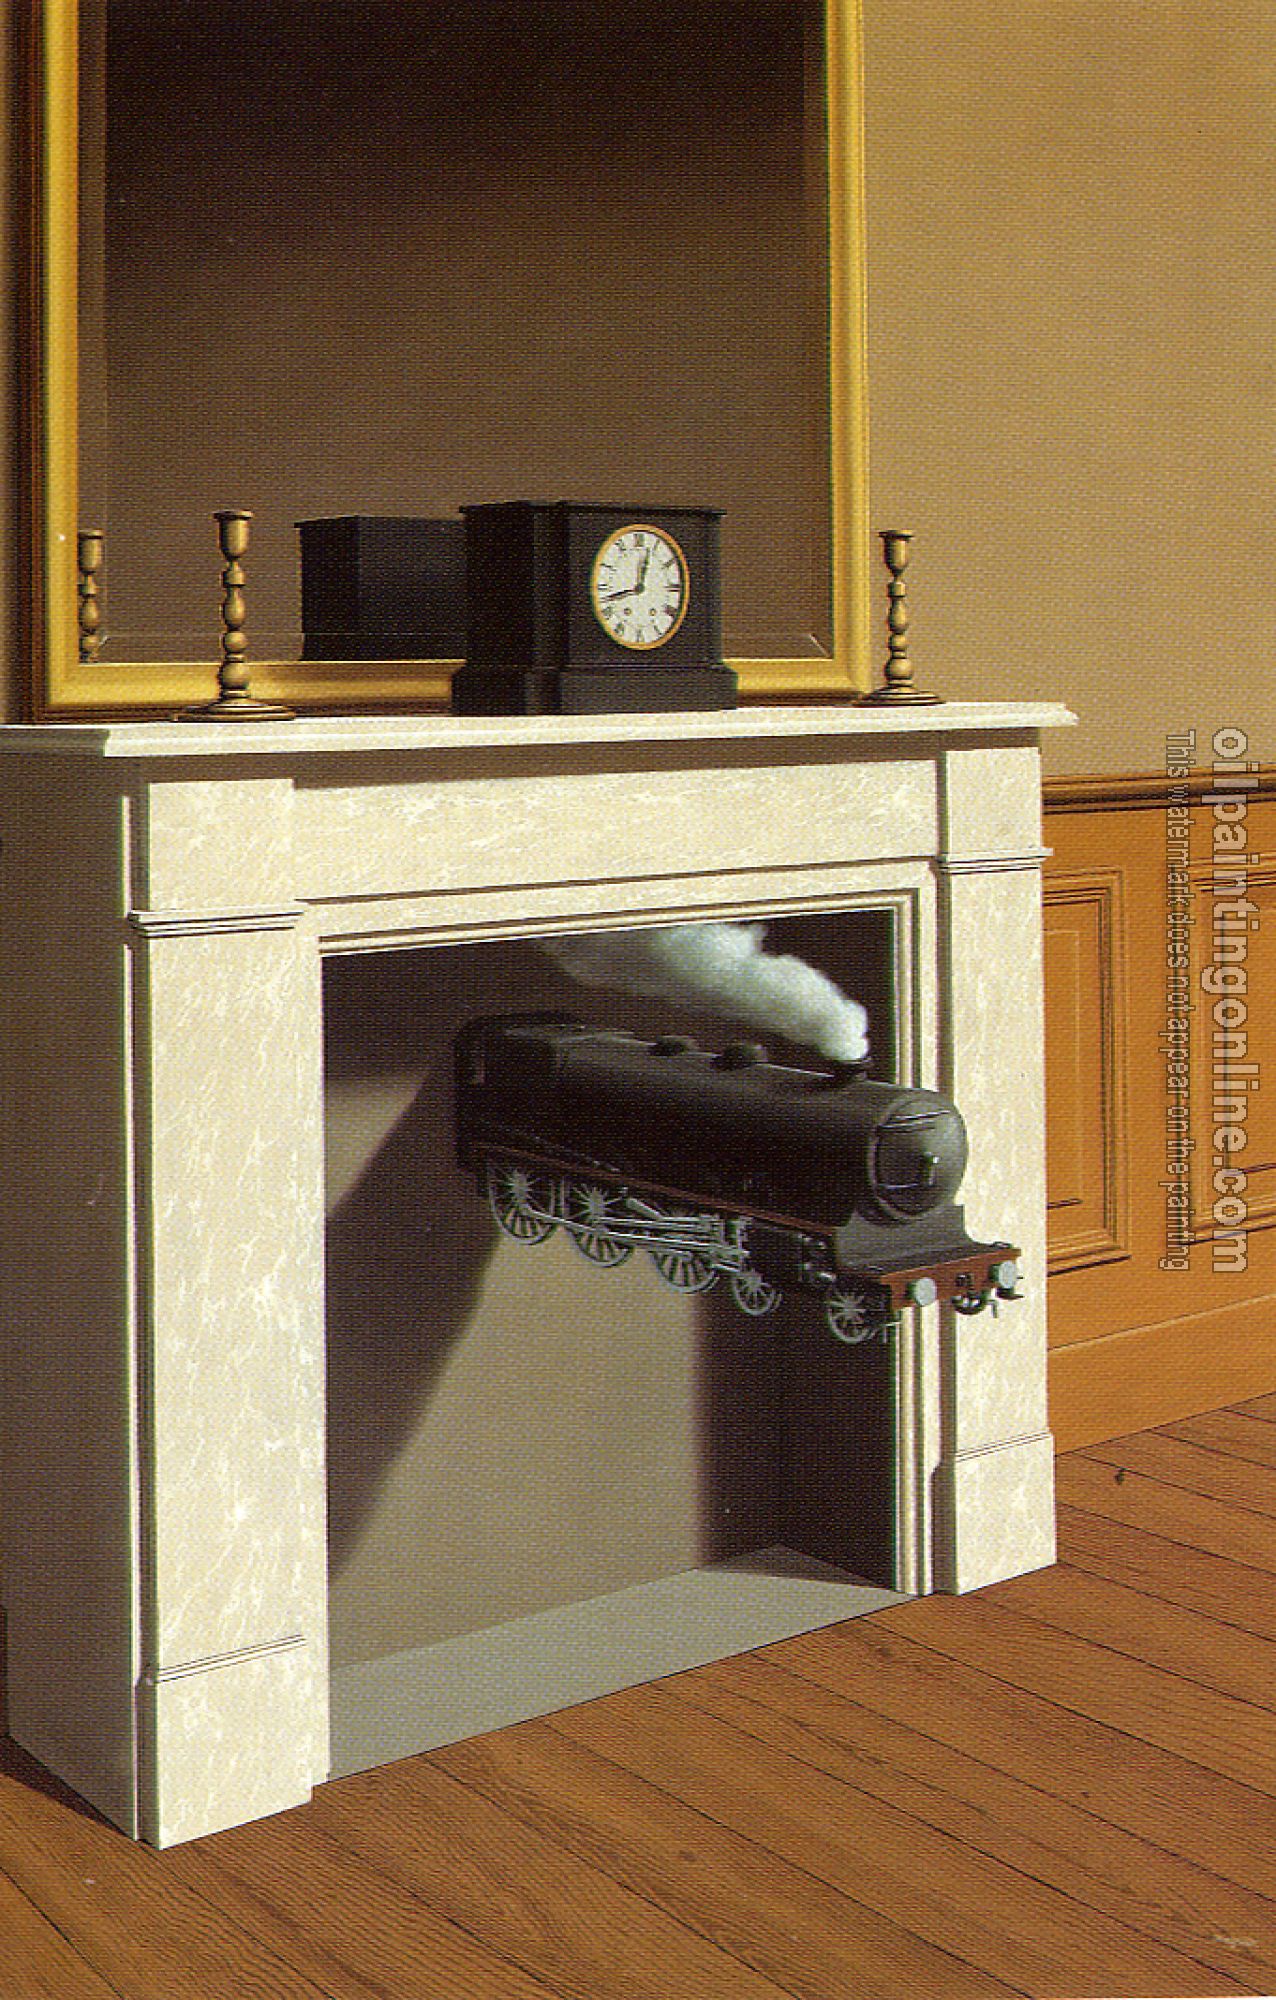 Magritte, Rene - time transfixed